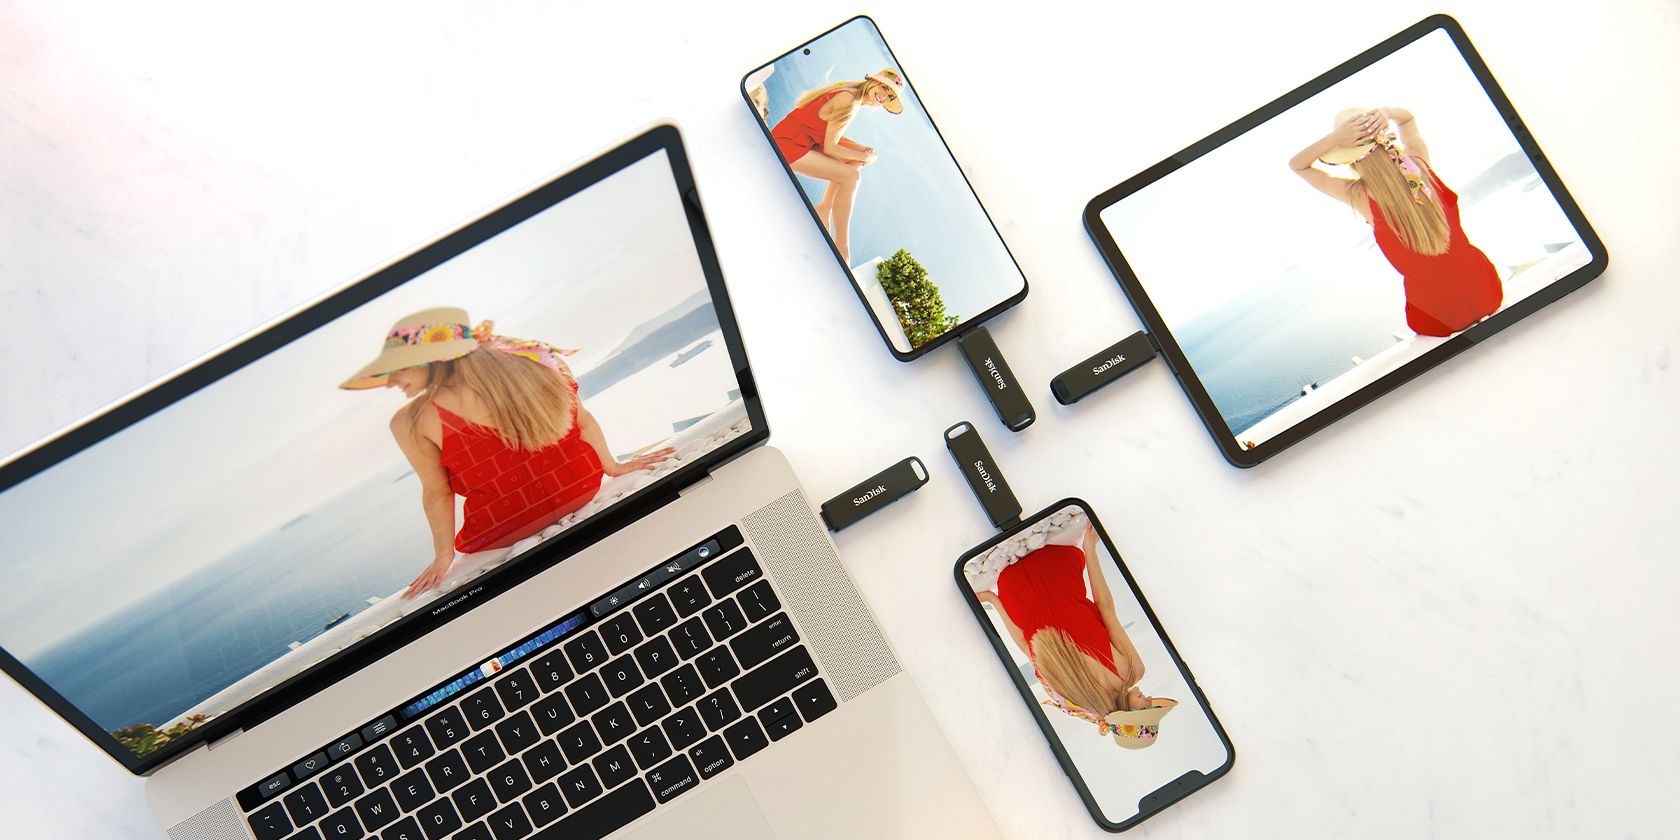 iXpand lash disk luxe with multiple devices